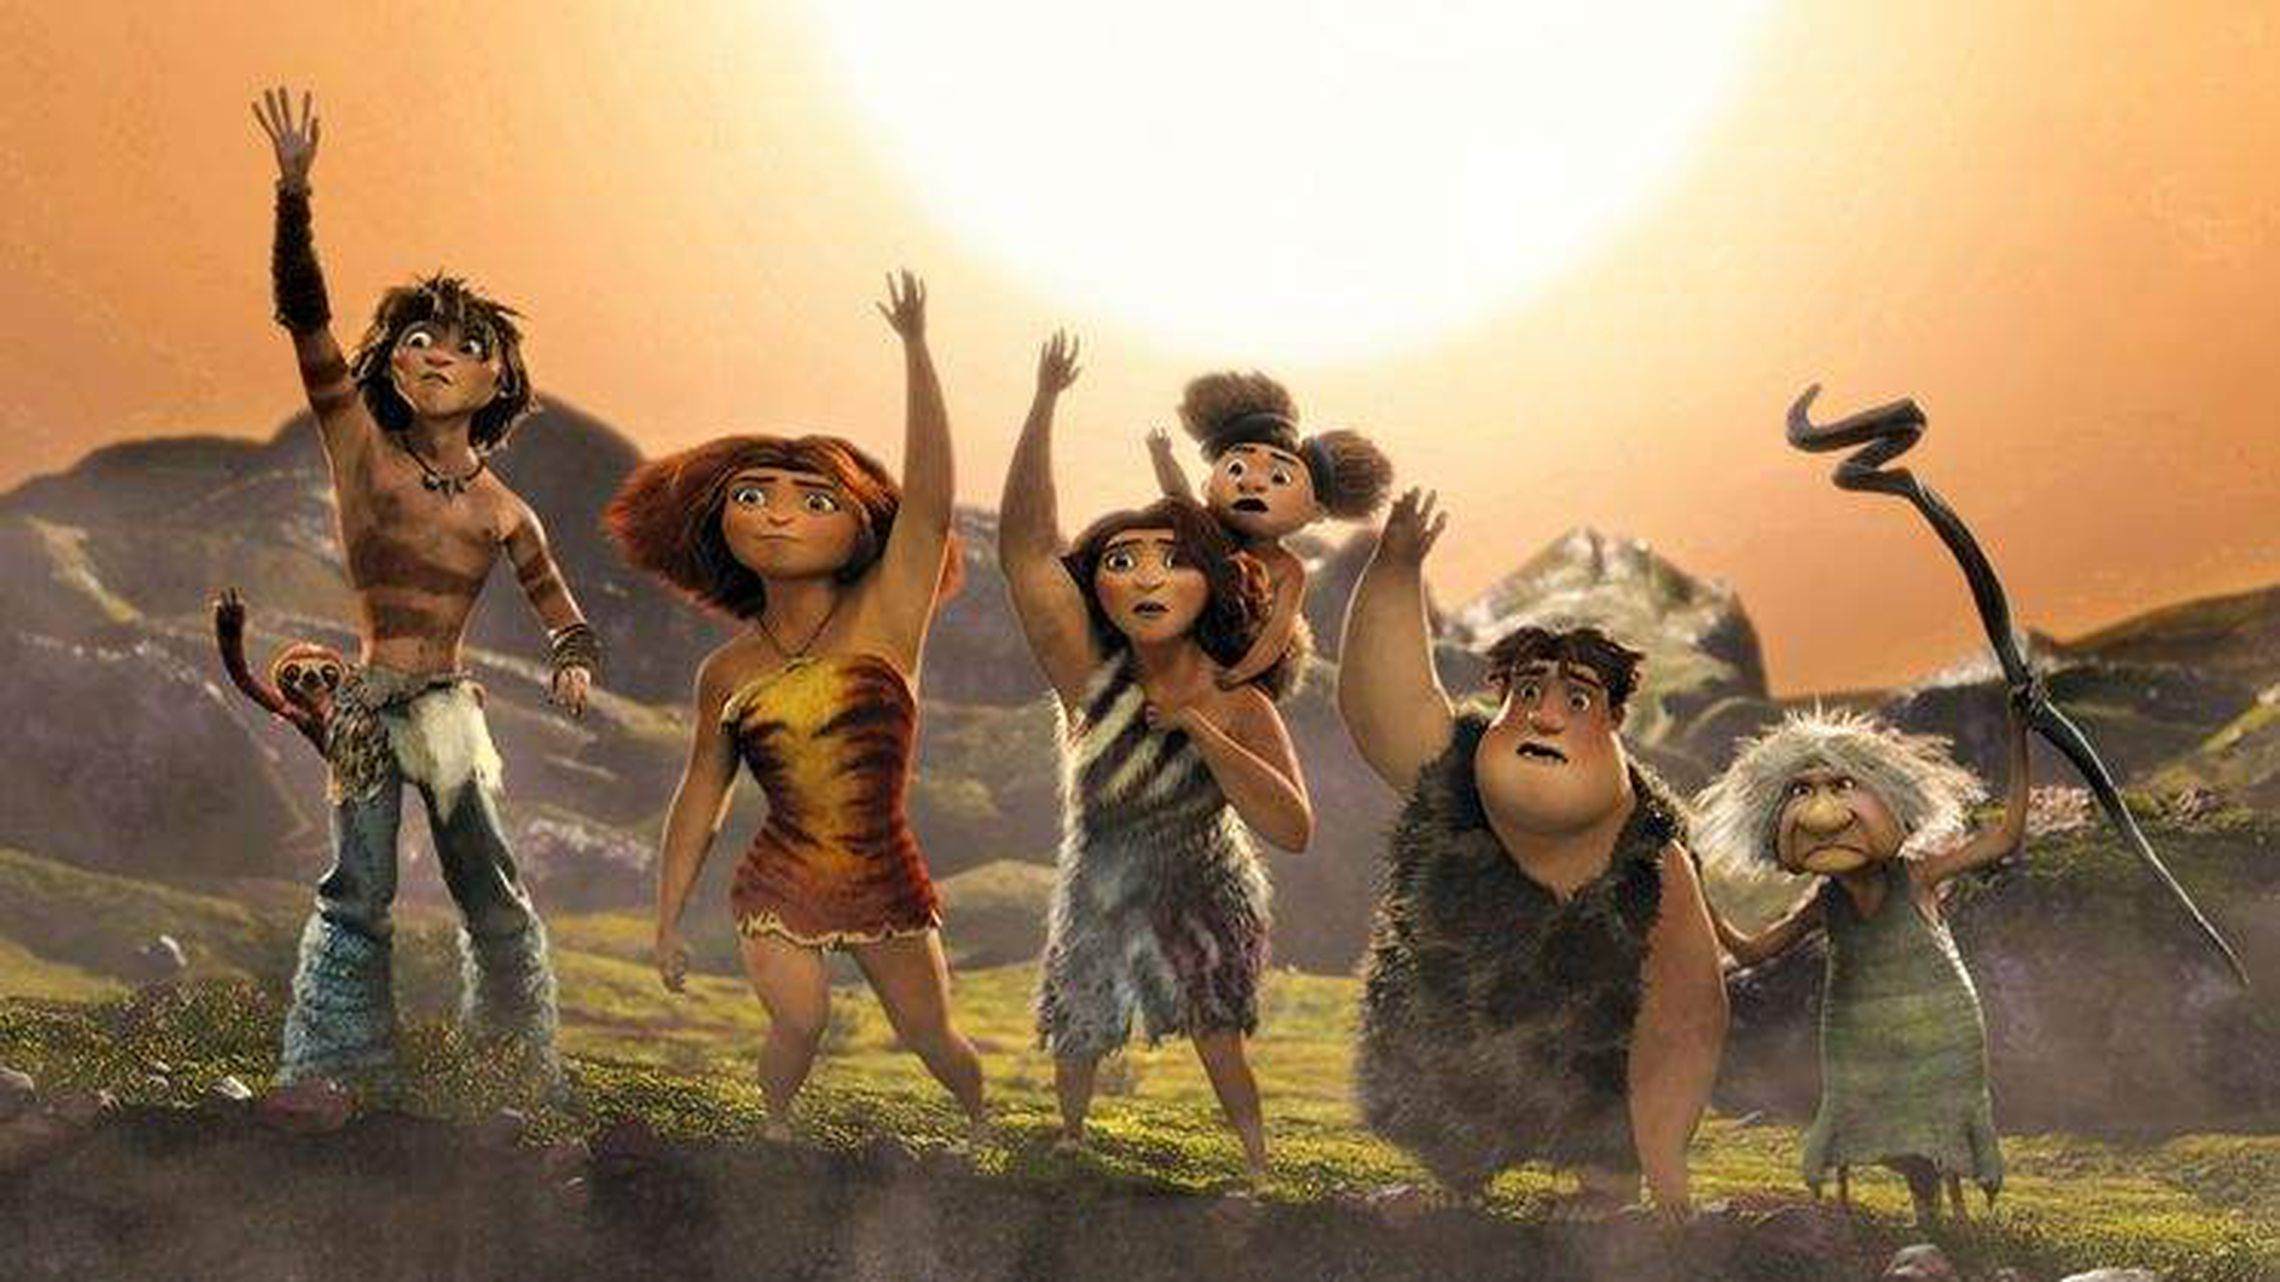 The Croods: [Animated] Best action movies on Netflix for kids in 2021